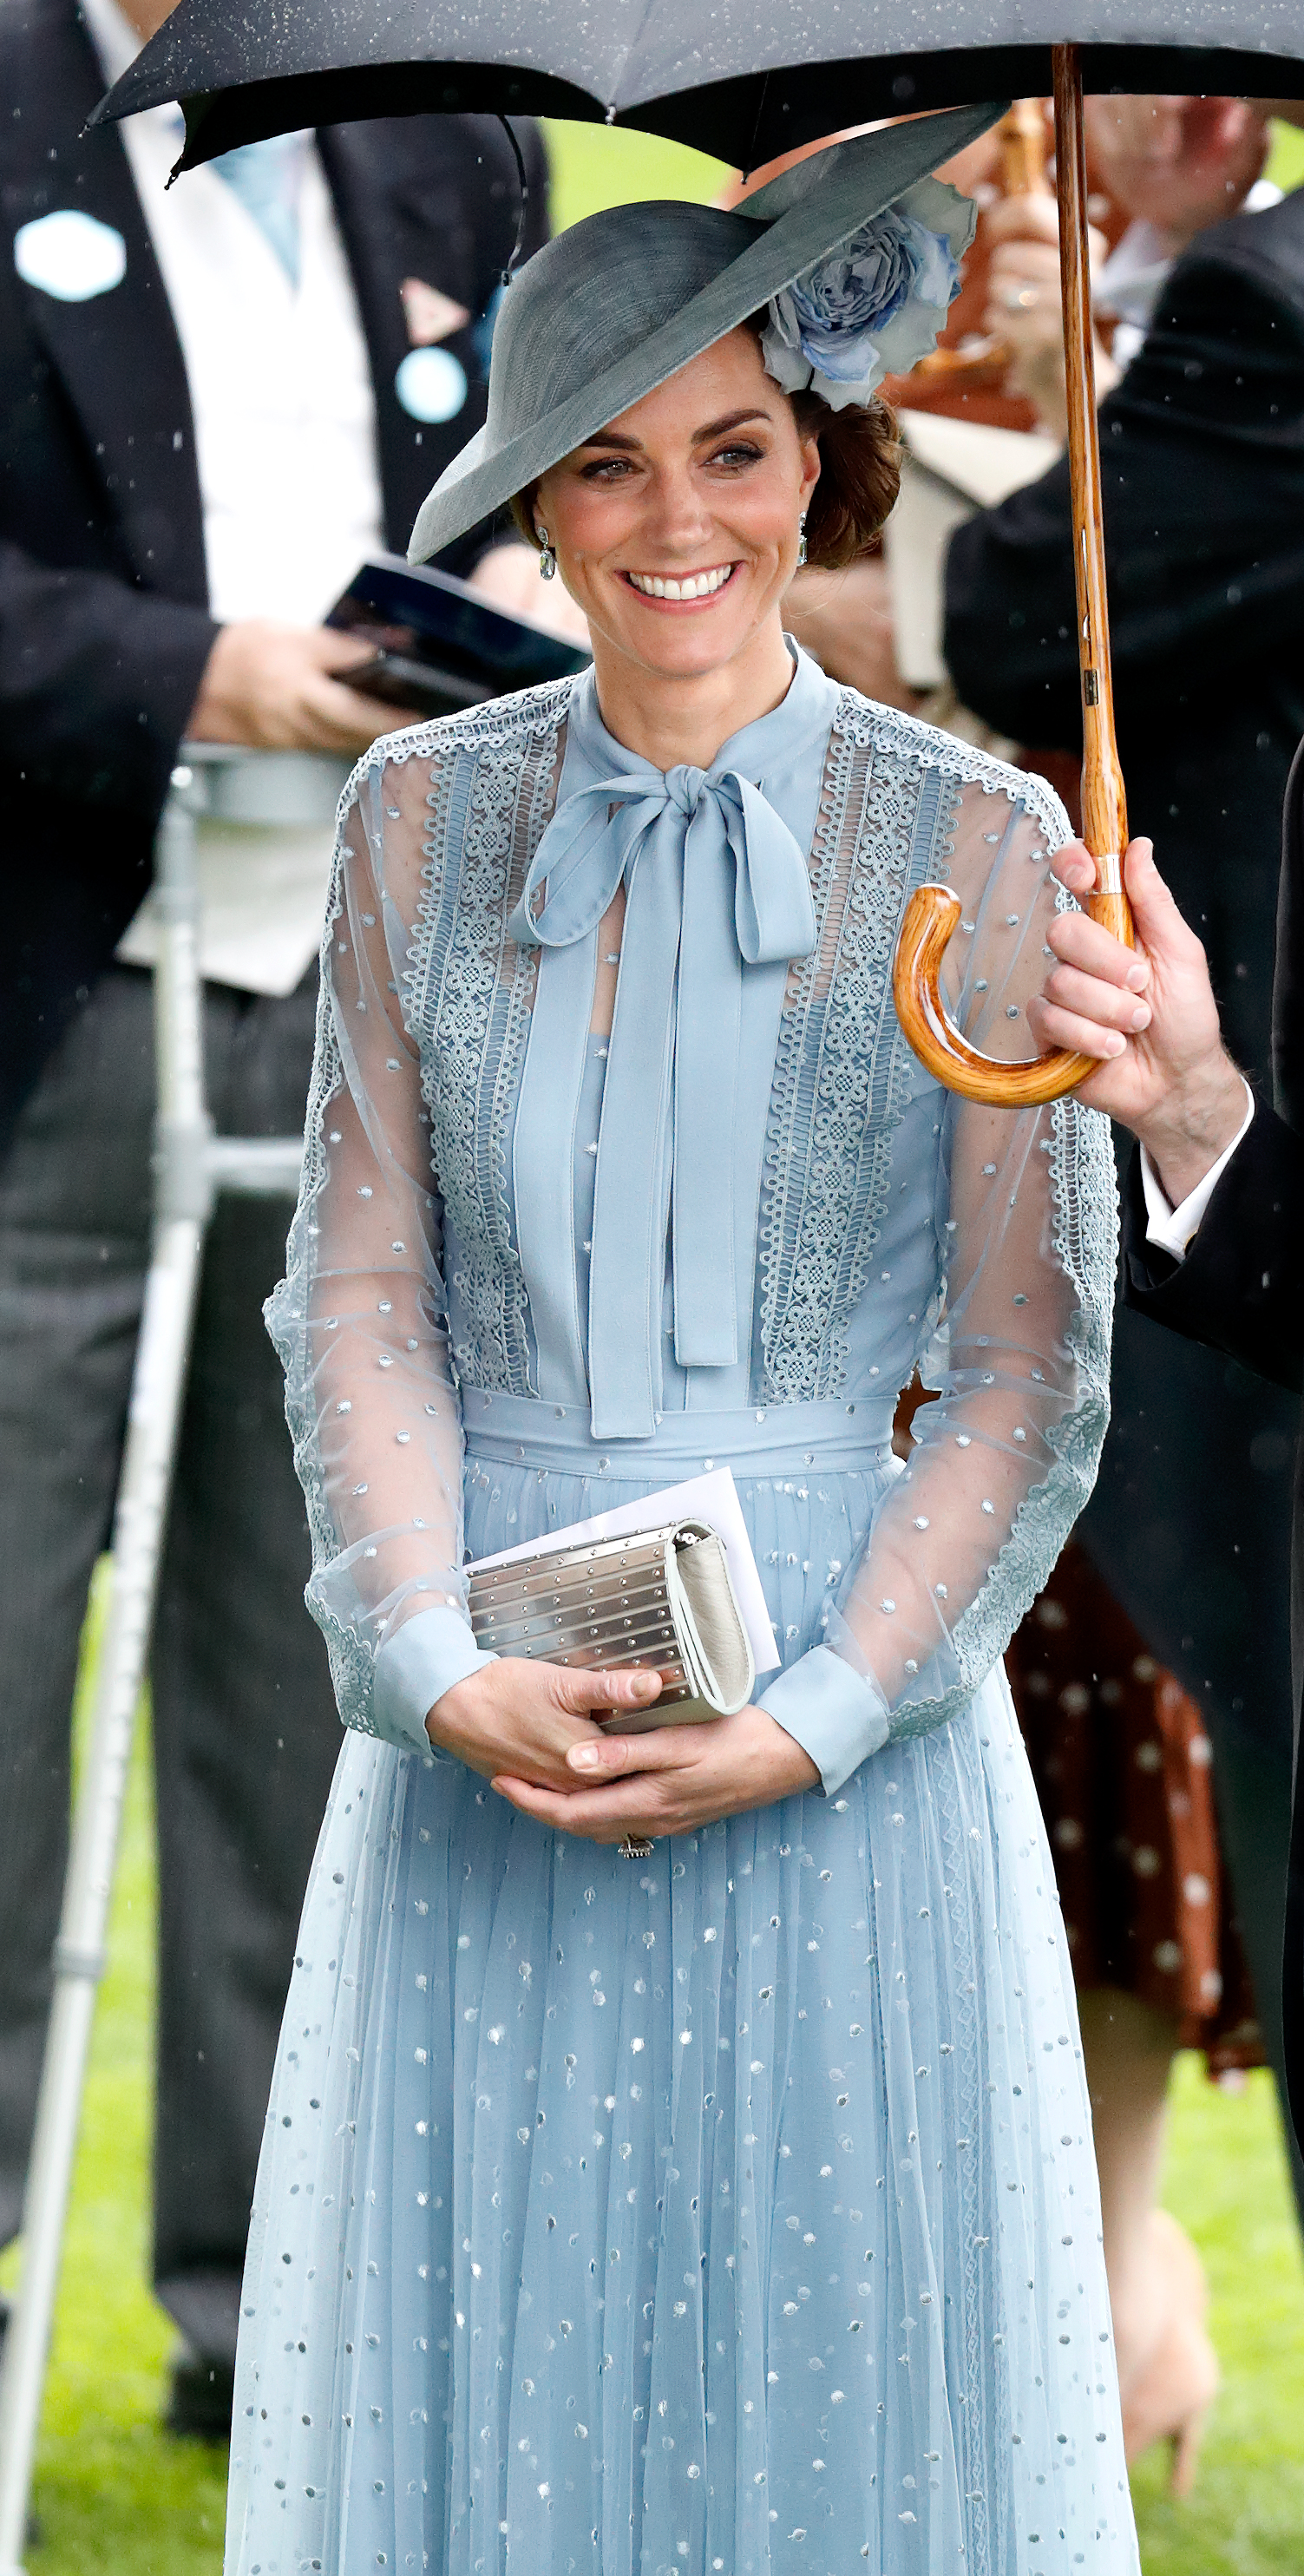 Princess Catherine at day one of the Royal Ascot in Ascot, England on June 18, 2019 | Source: Getty Images